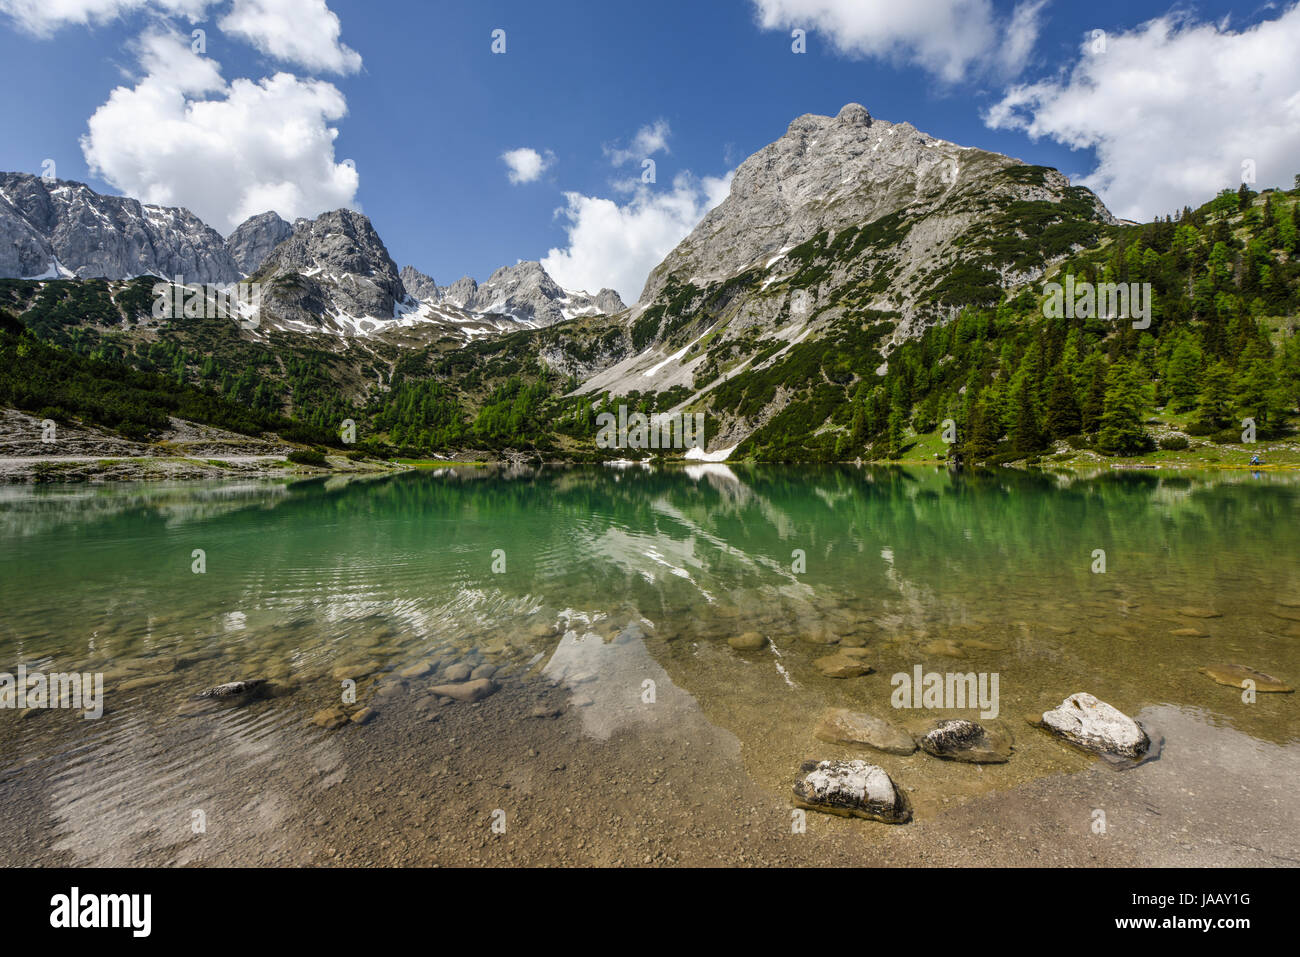 Scenic lake Seebensee  with reflections in the turquoise water, Ehrwald, Tyrol, Austria, Europe Stock Photo